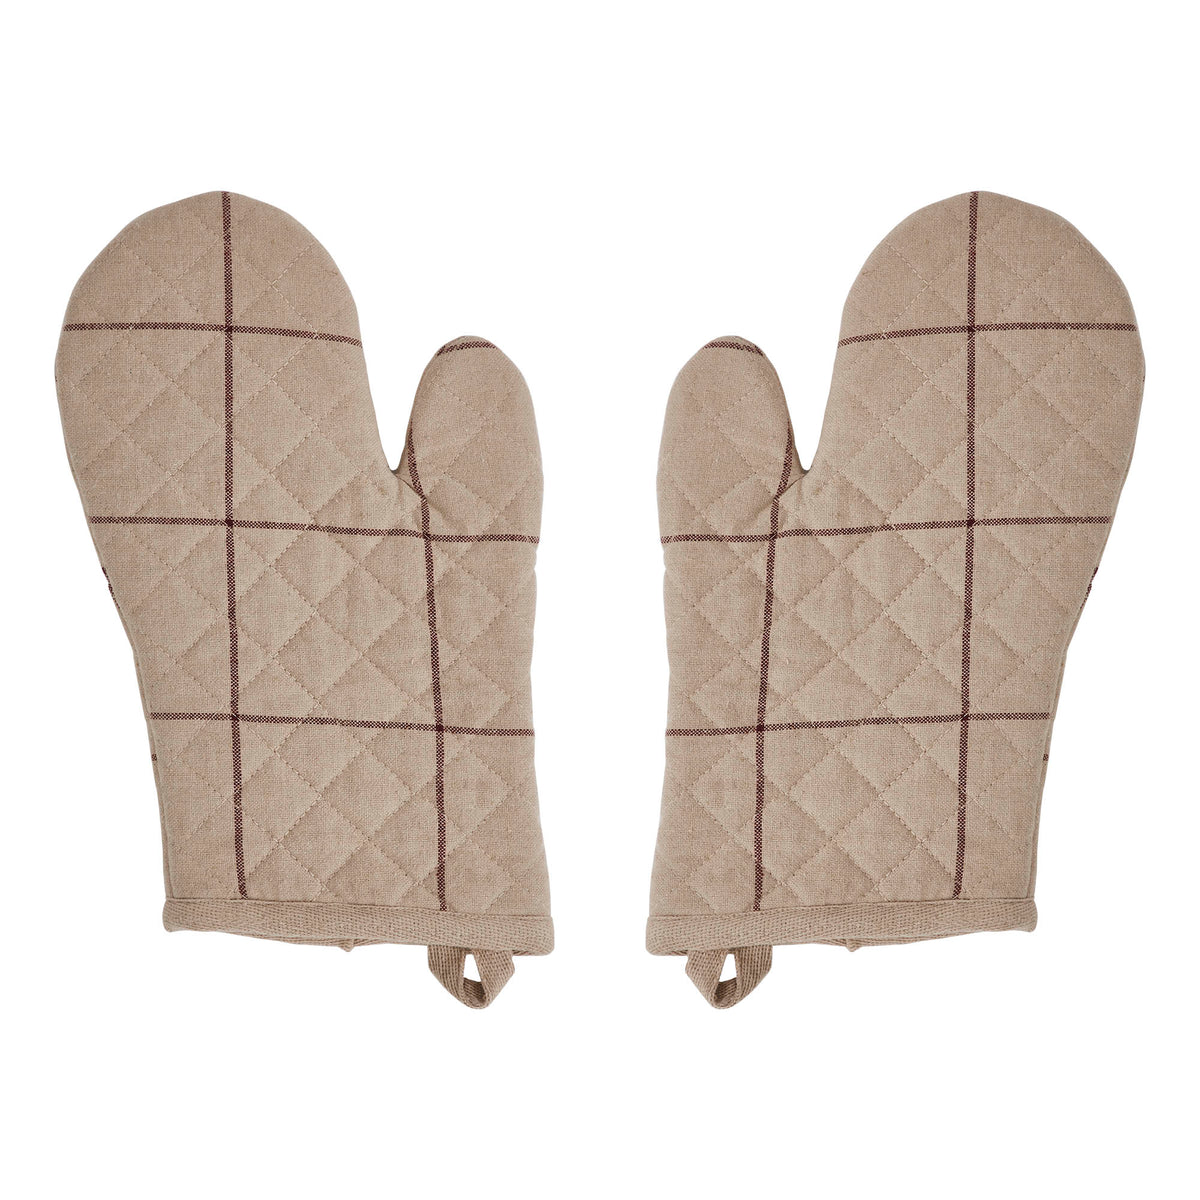 Connell Oven Mitt Set of 2